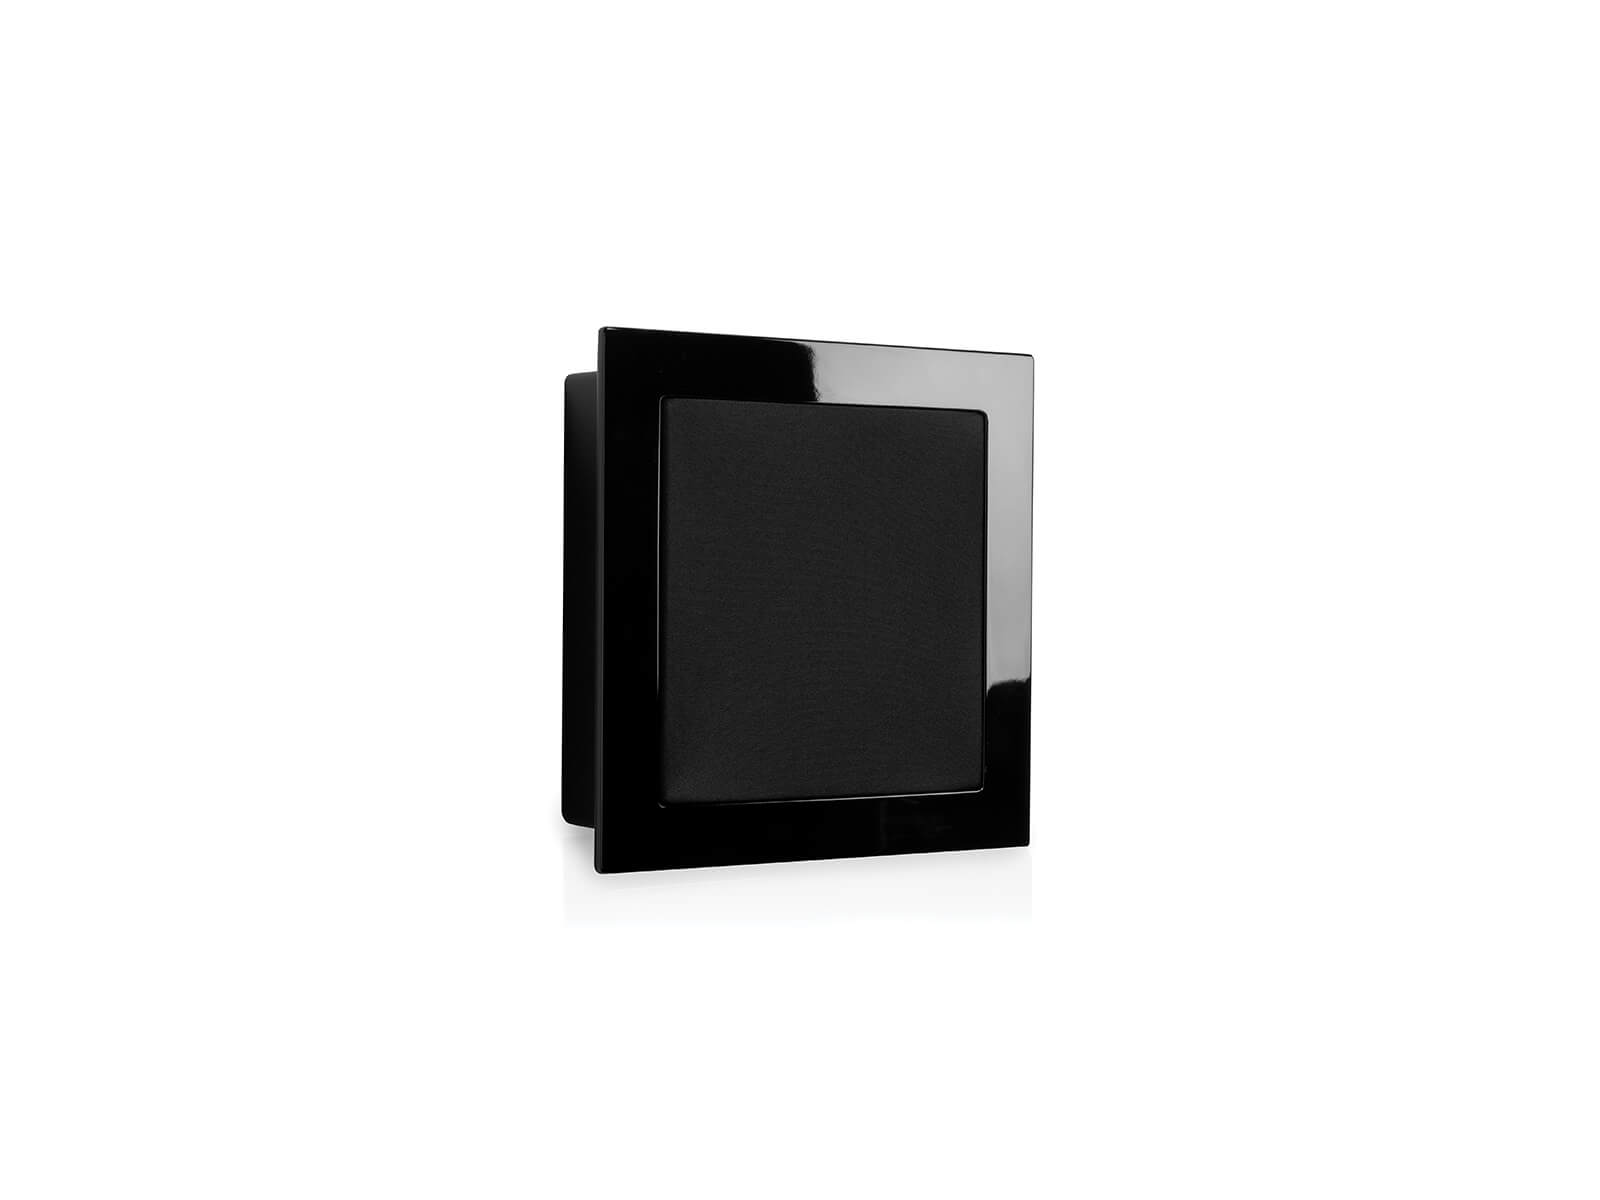 SoundFrame SF3, in-wall speakers, with a high gloss black lacquer finish.